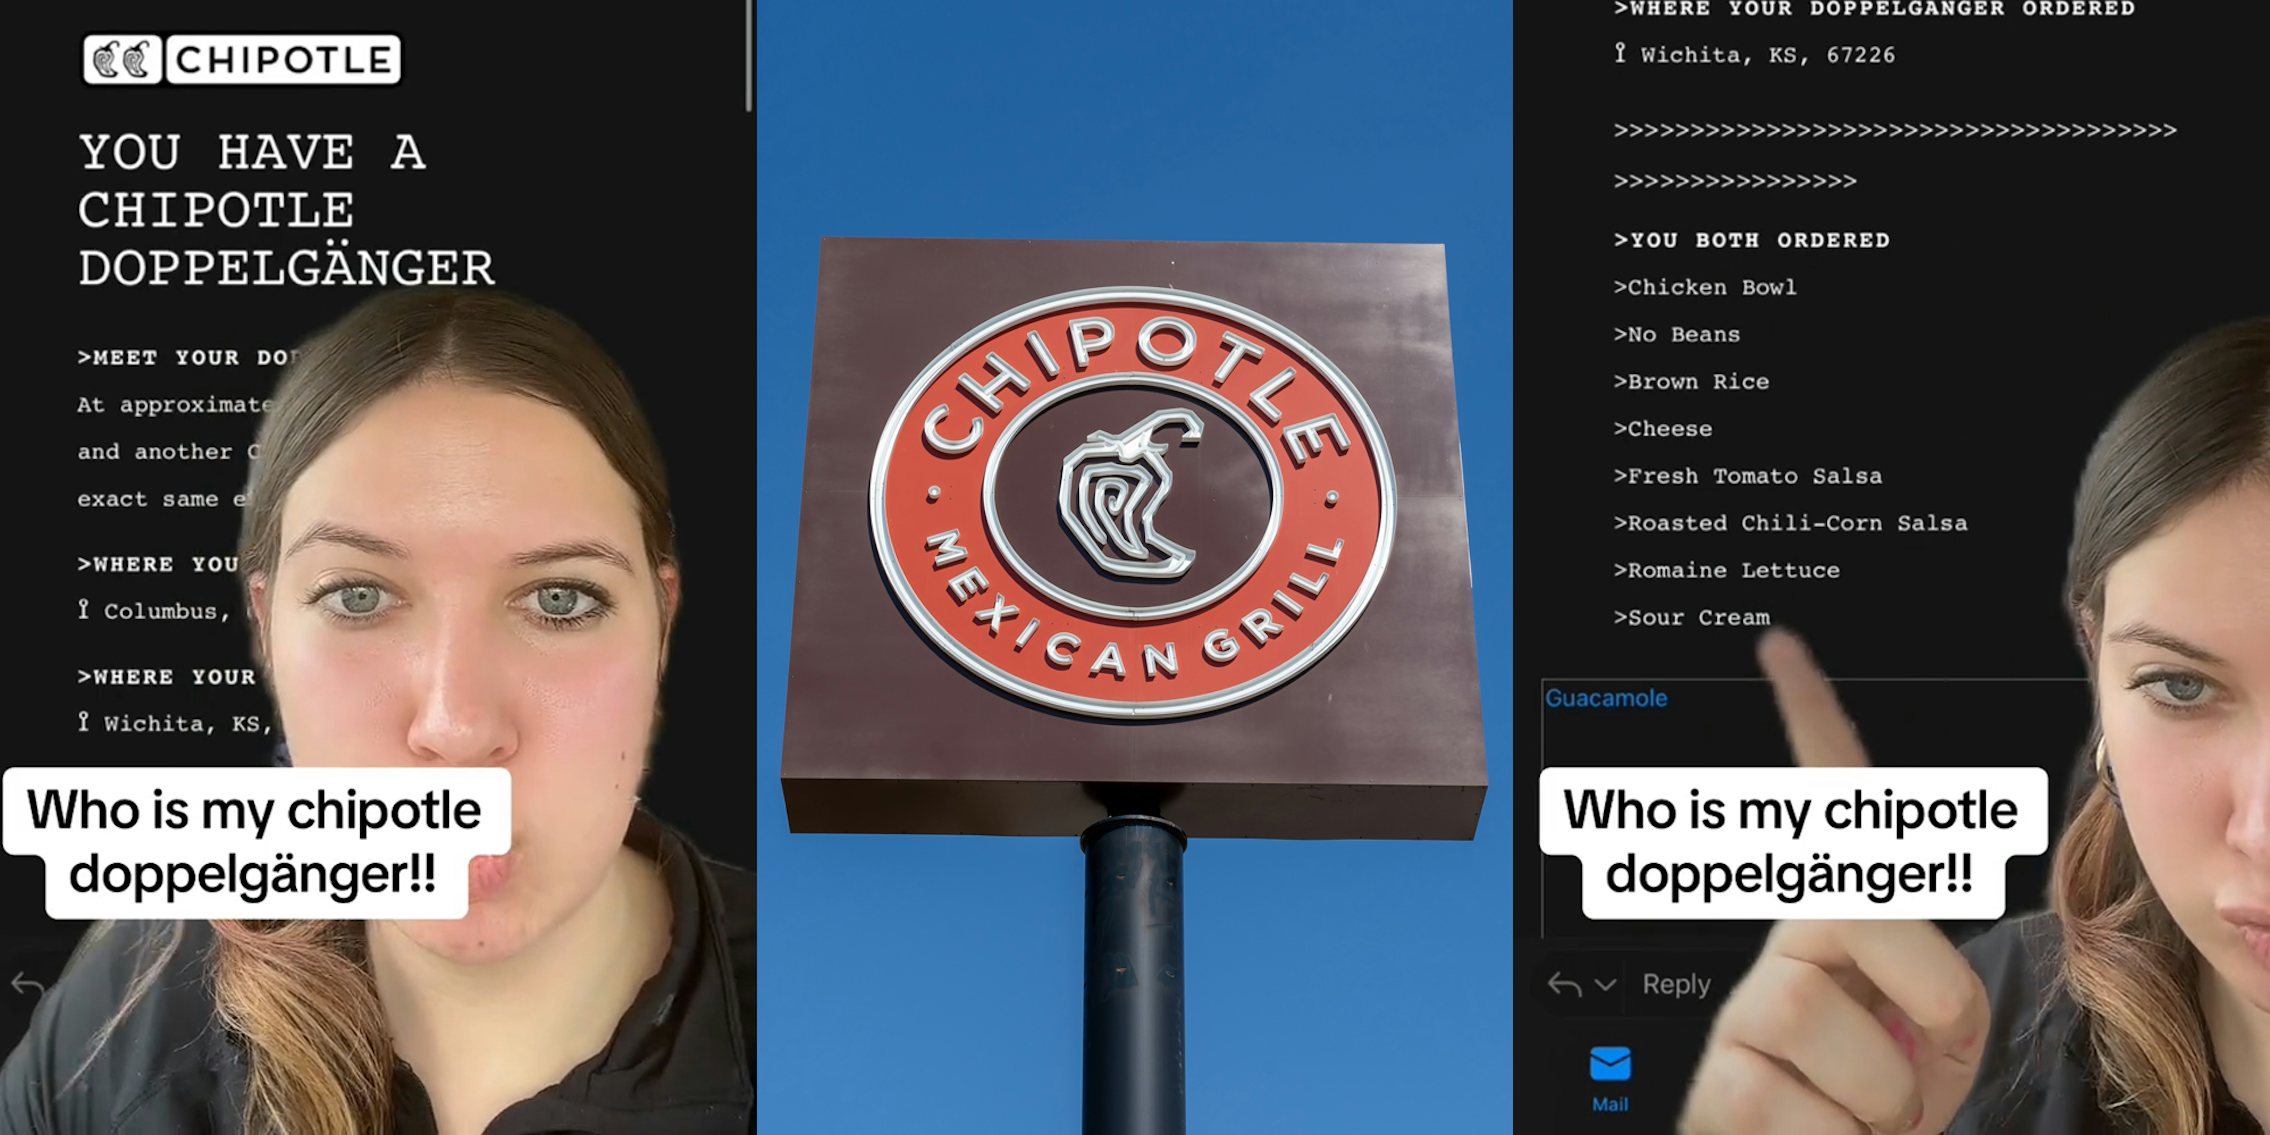 Chipotle customer greenscreen TikTok over Chipotle YOU HAVE A CHIPOTLE DOPPLEGANGER email with caption 'Who is my chipotle doppleganger' (l) Chipotle sign (c) Chipotle customer greenscreen TikTok over Chipotle YOU HAVE A CHIPOTLE DOPPLEGANGER email with caption 'Who is my chipotle doppleganger' (r)